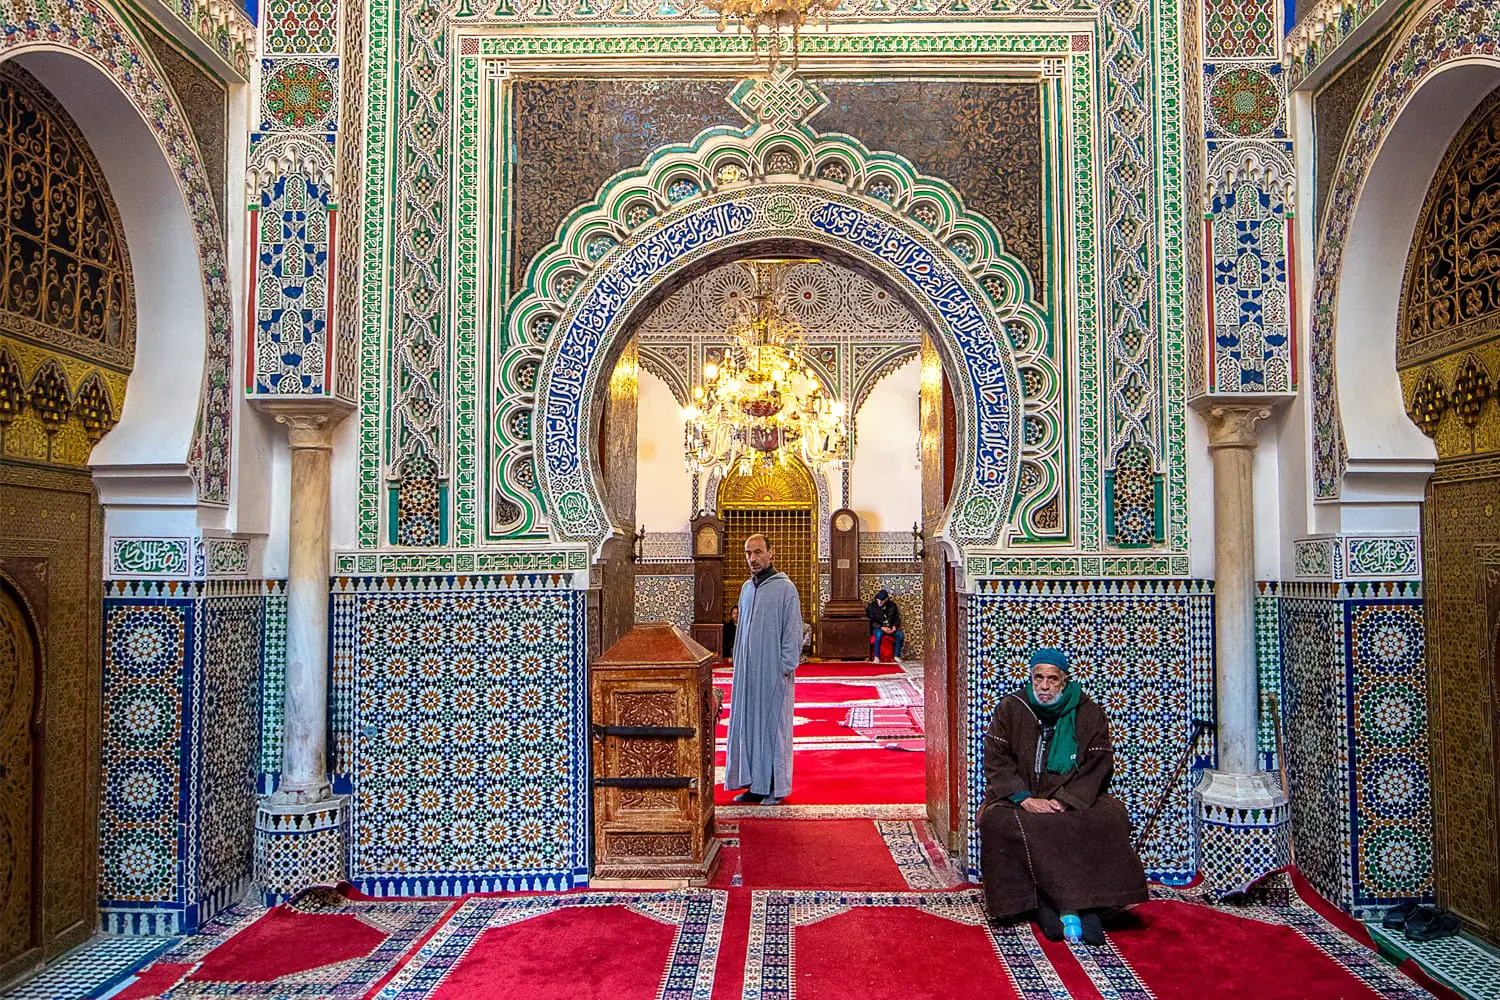 Inside courtyard and interior of The Zaouia Moulay Idriss II is shrine or mosque and is dedicated to and tomb of Moulay Idriss II in Fez, Morocco